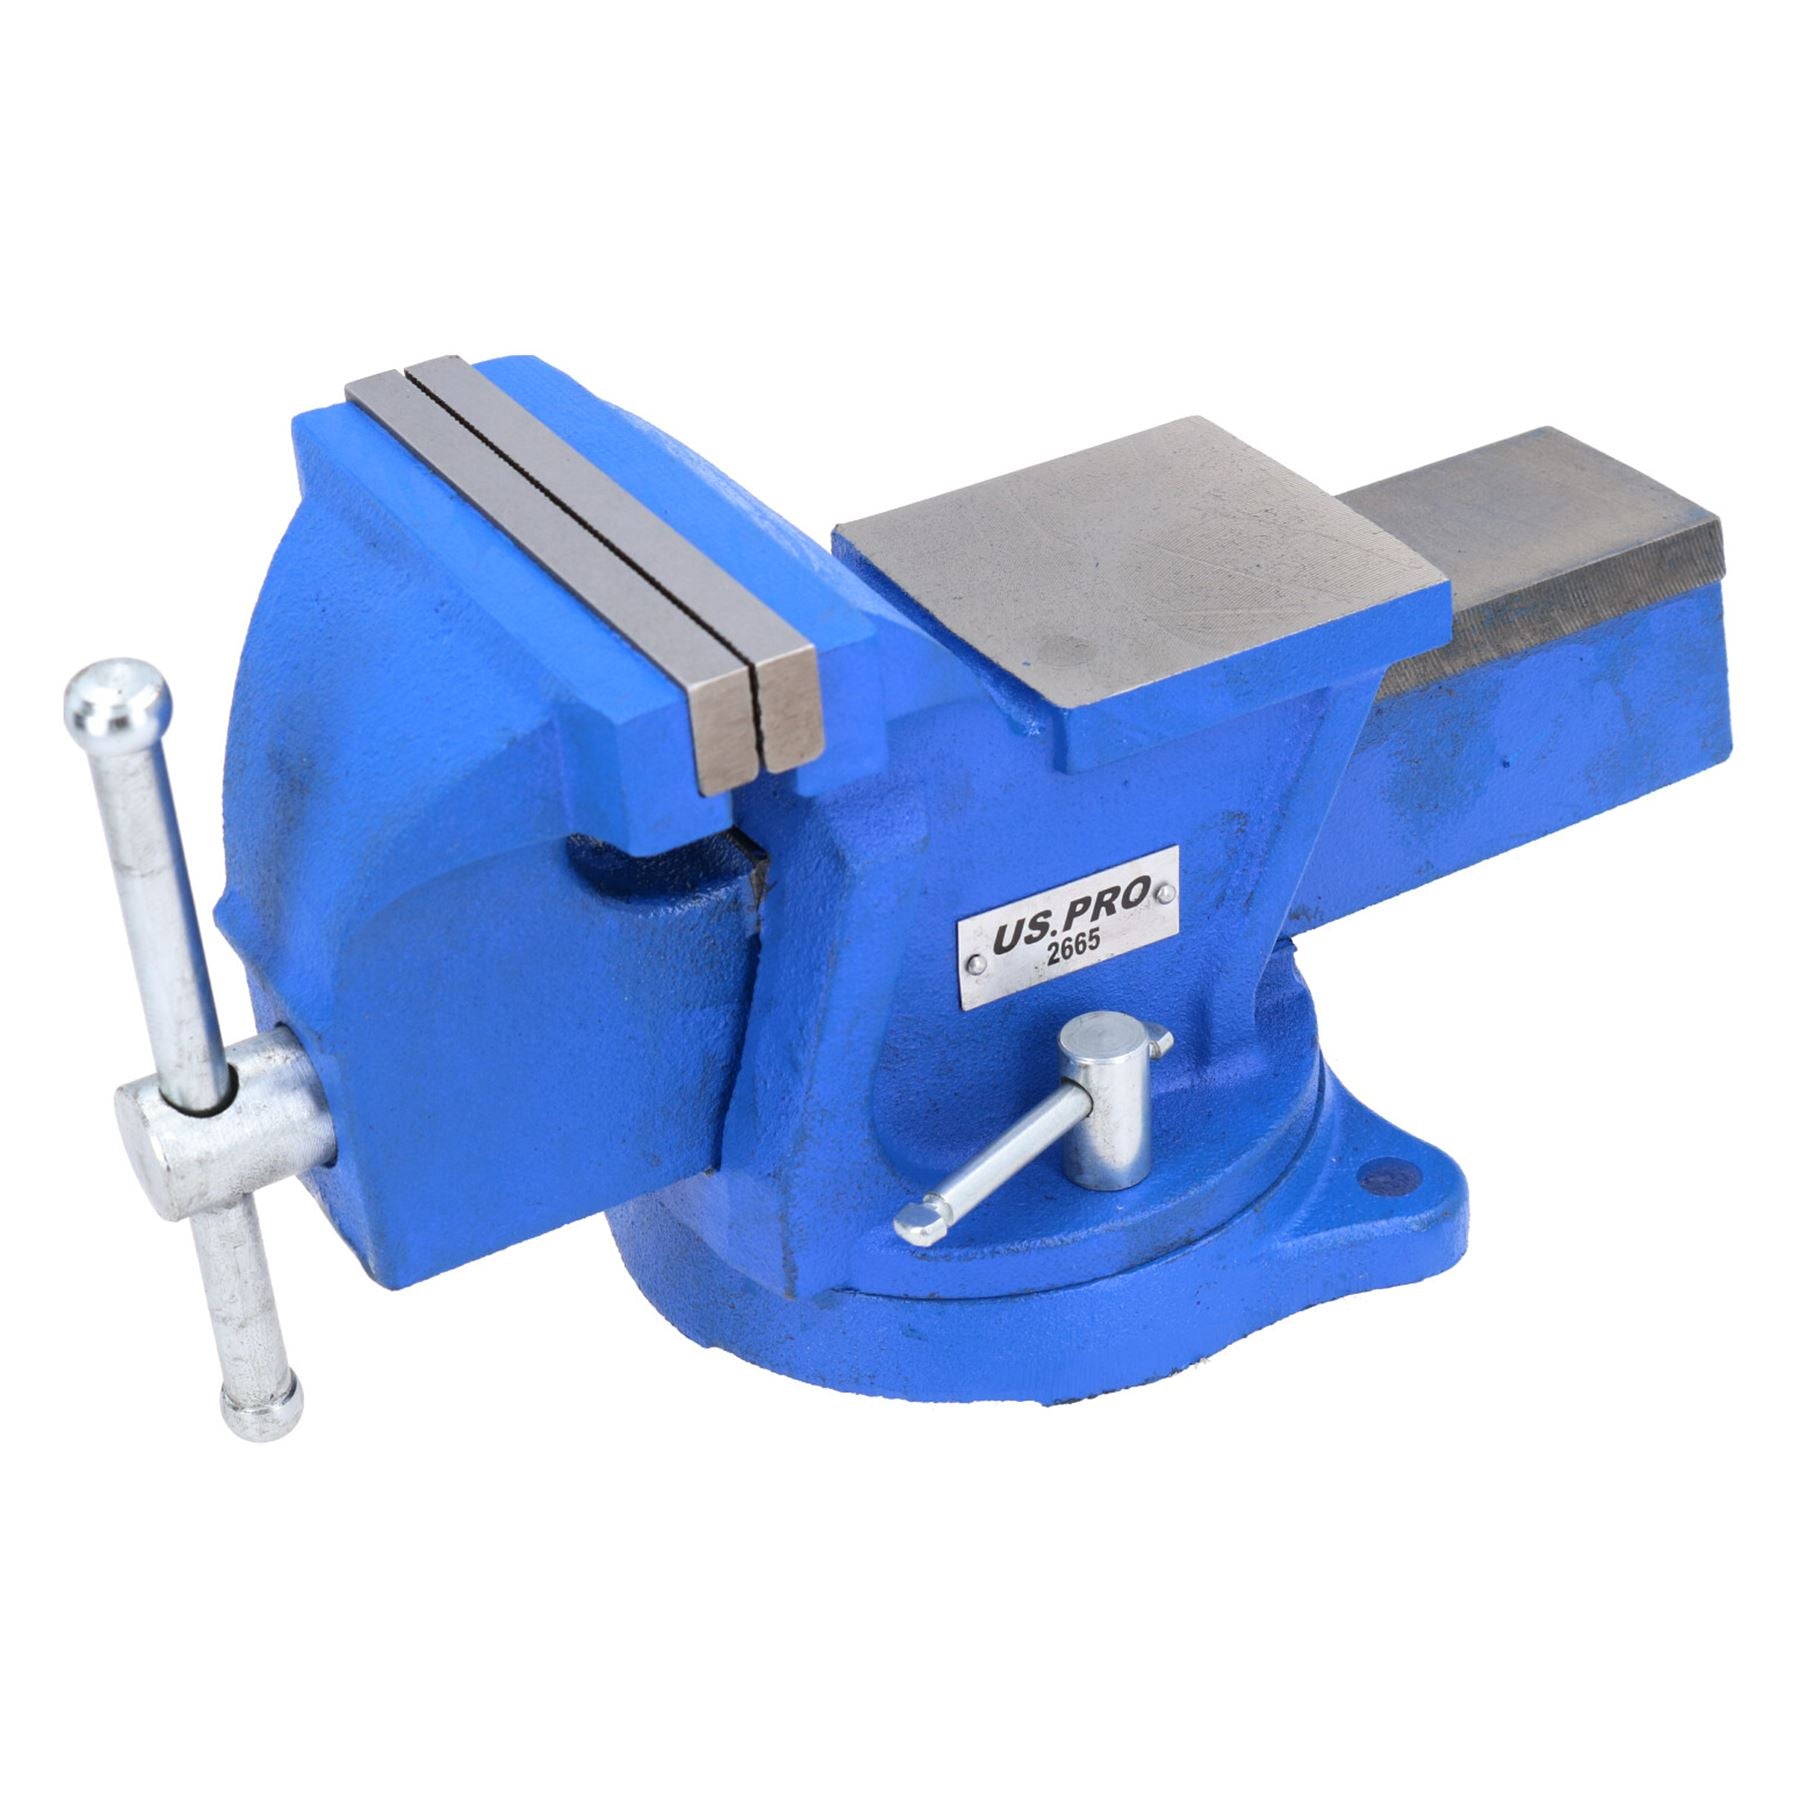 5” Heavy Duty Engineer Swivel Bench Vice Vise Clamp Workbench with Anvil